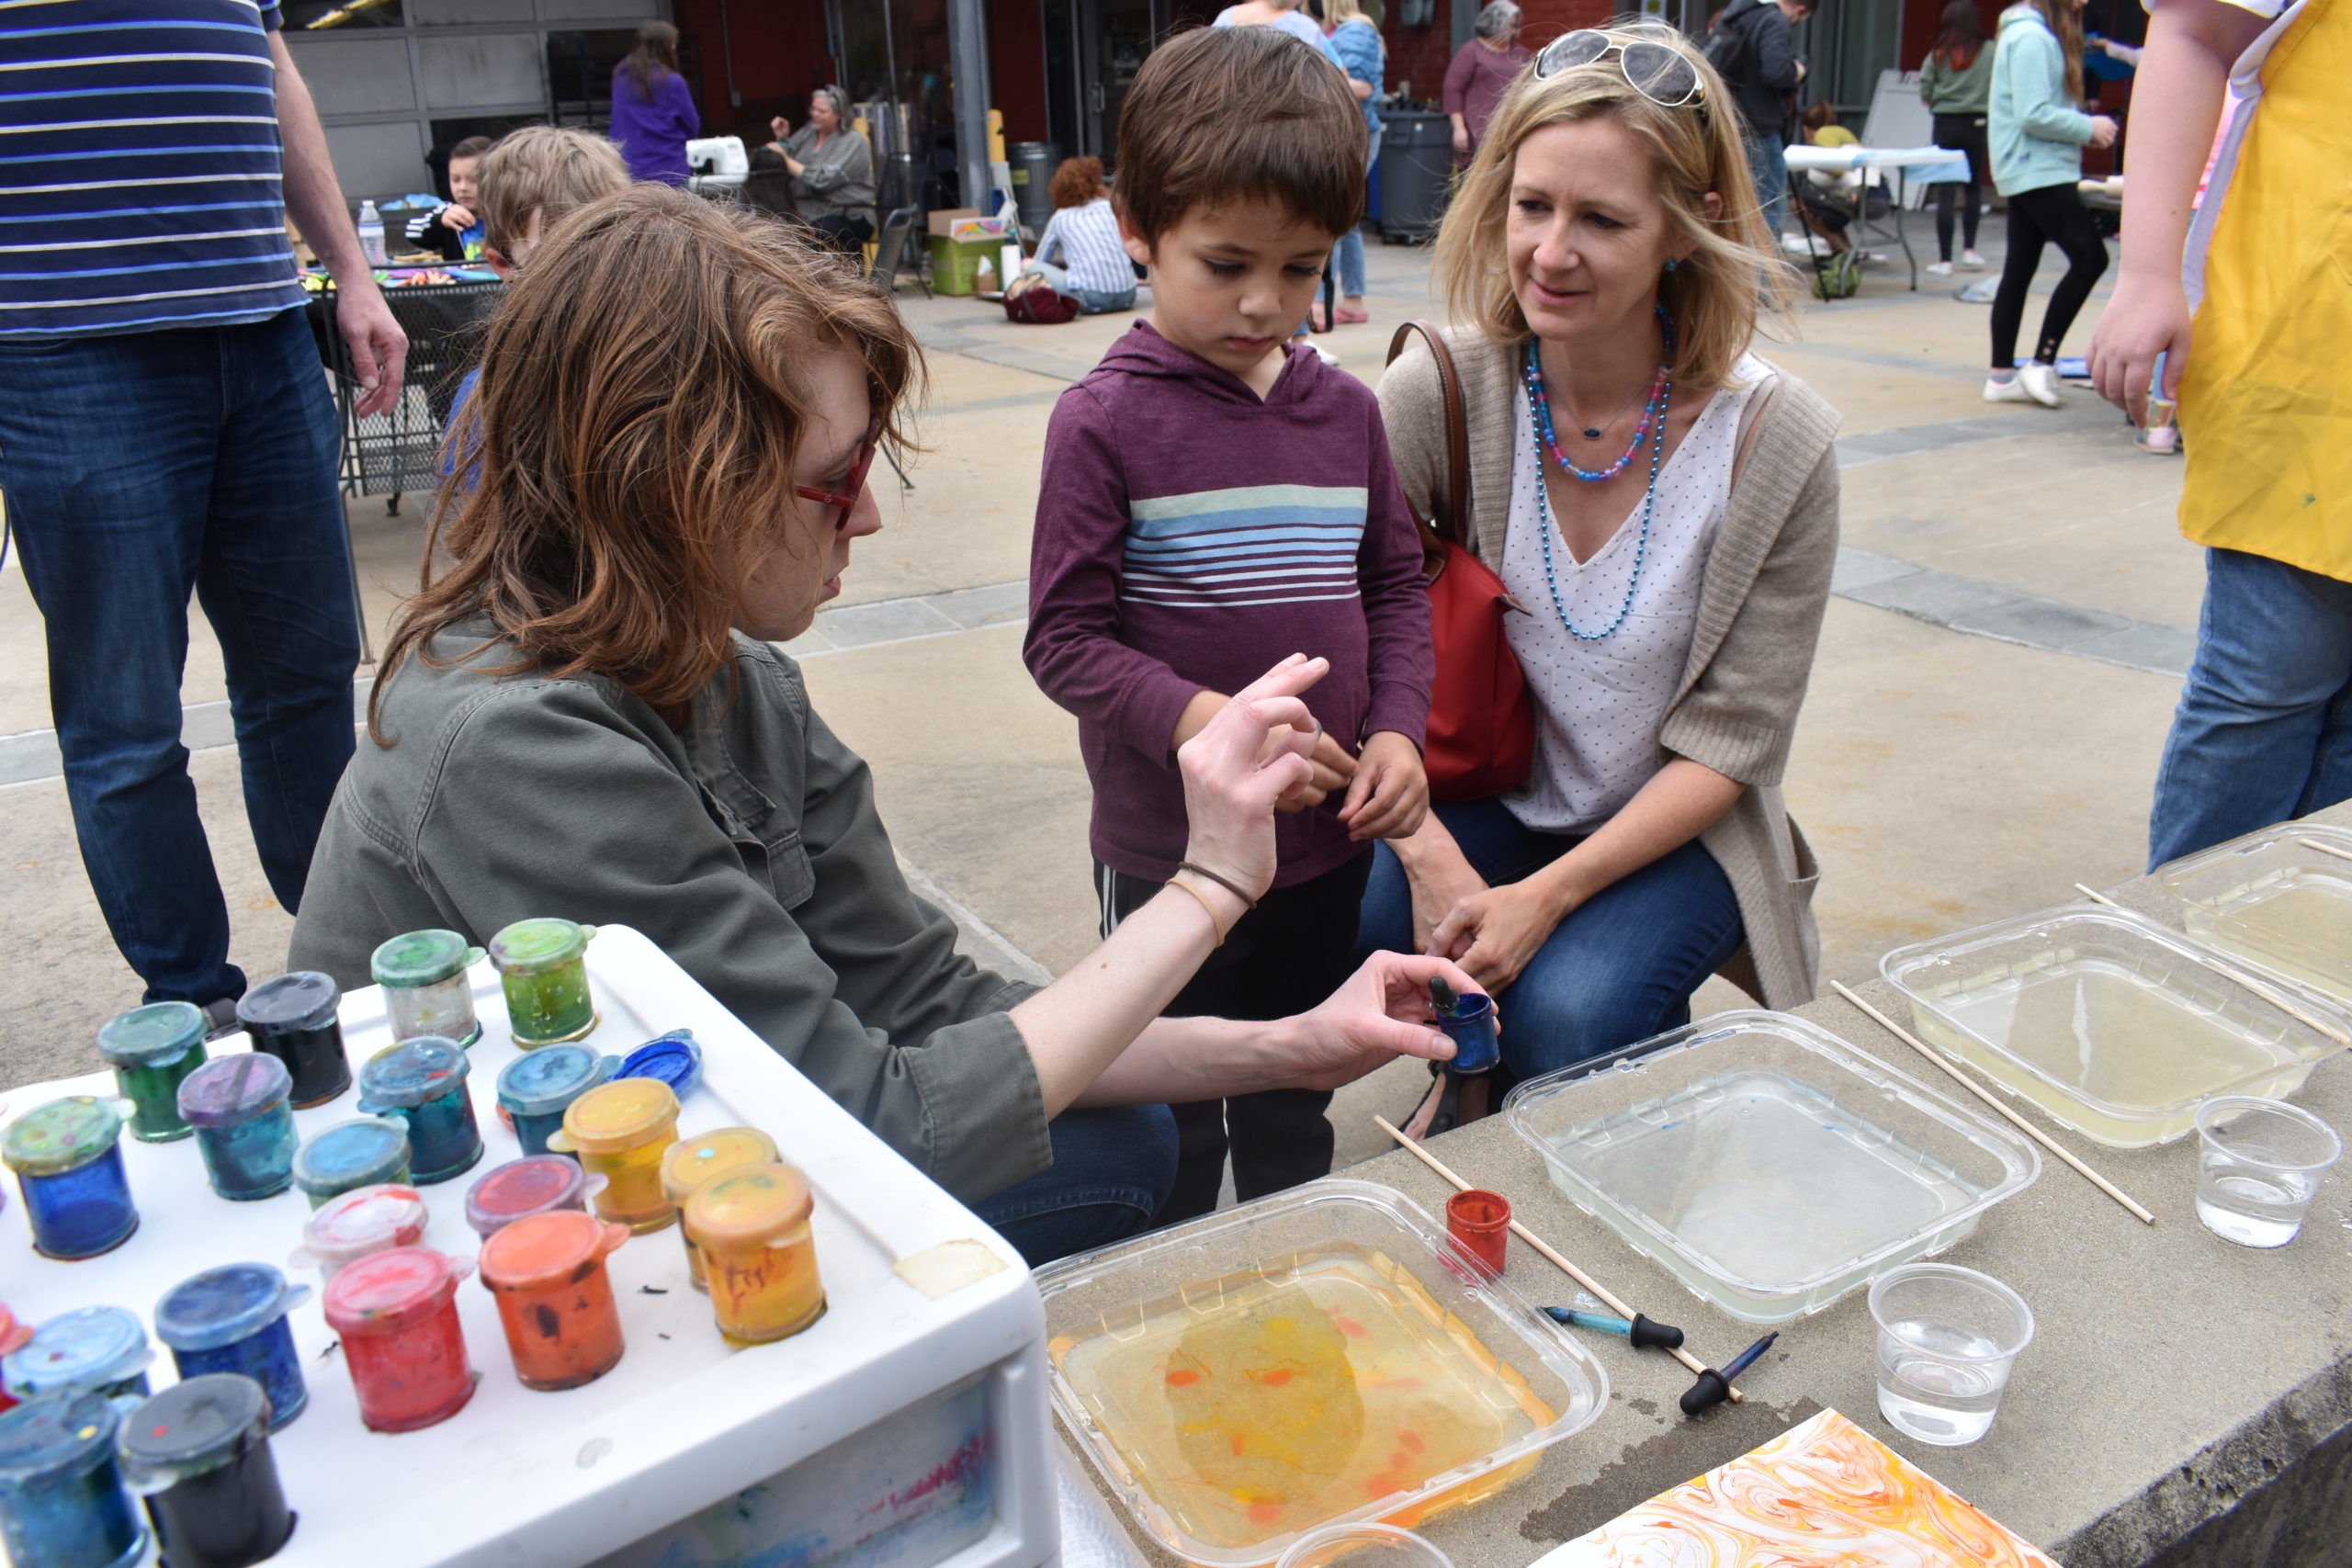 A woman is showing a child and his parent how to drip paint